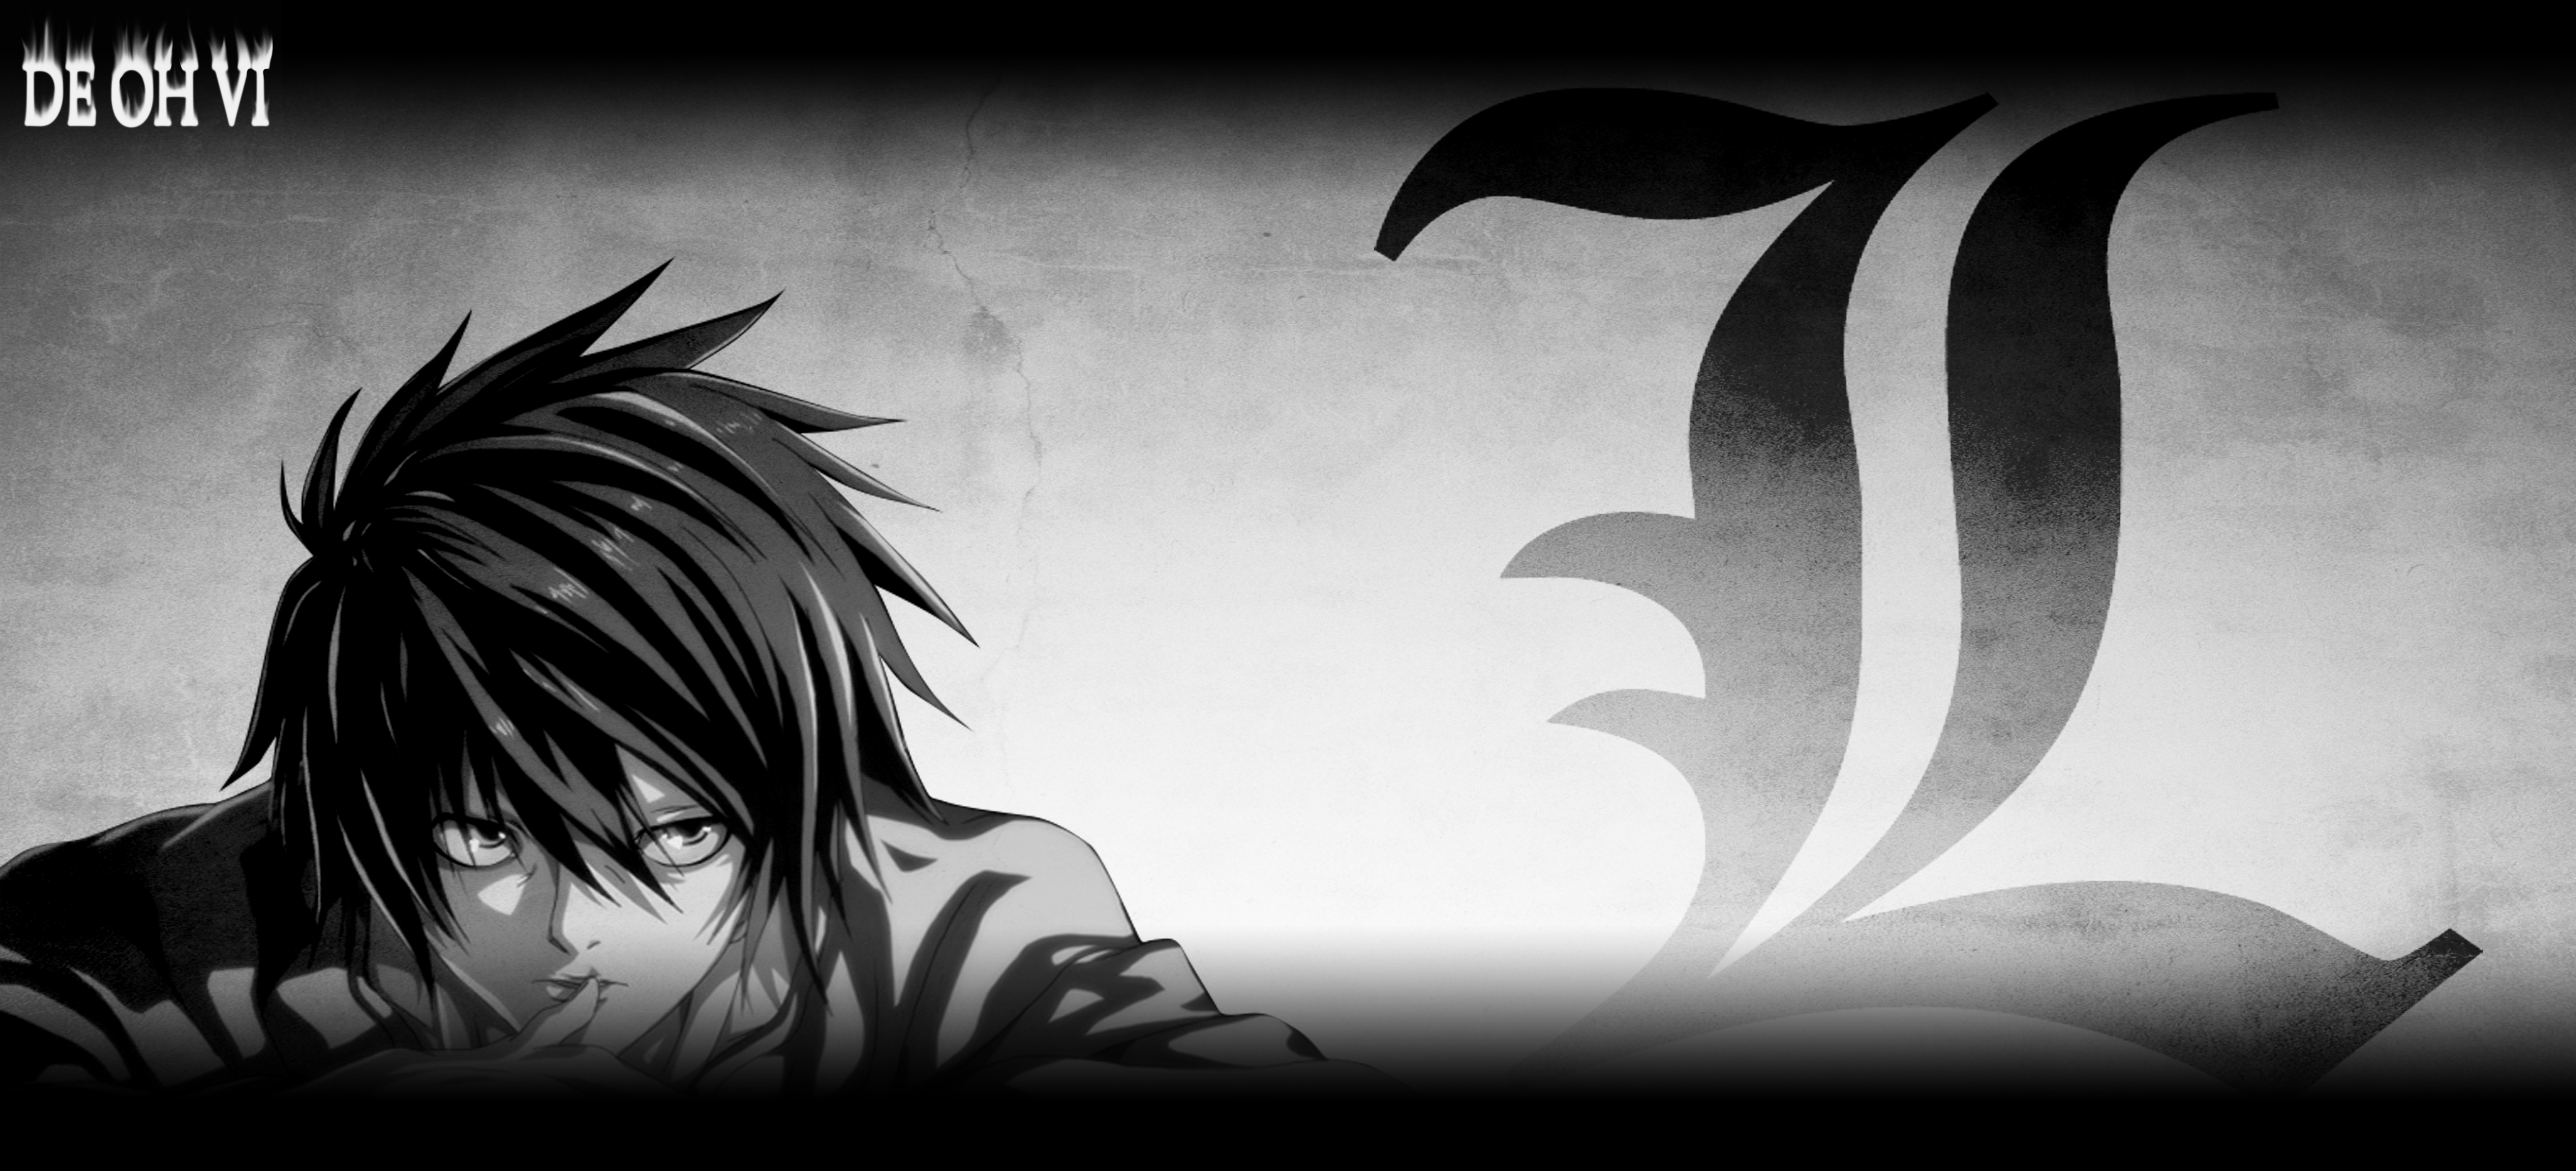 L  Death Note 3 wallpaper  Anime wallpapers  14078